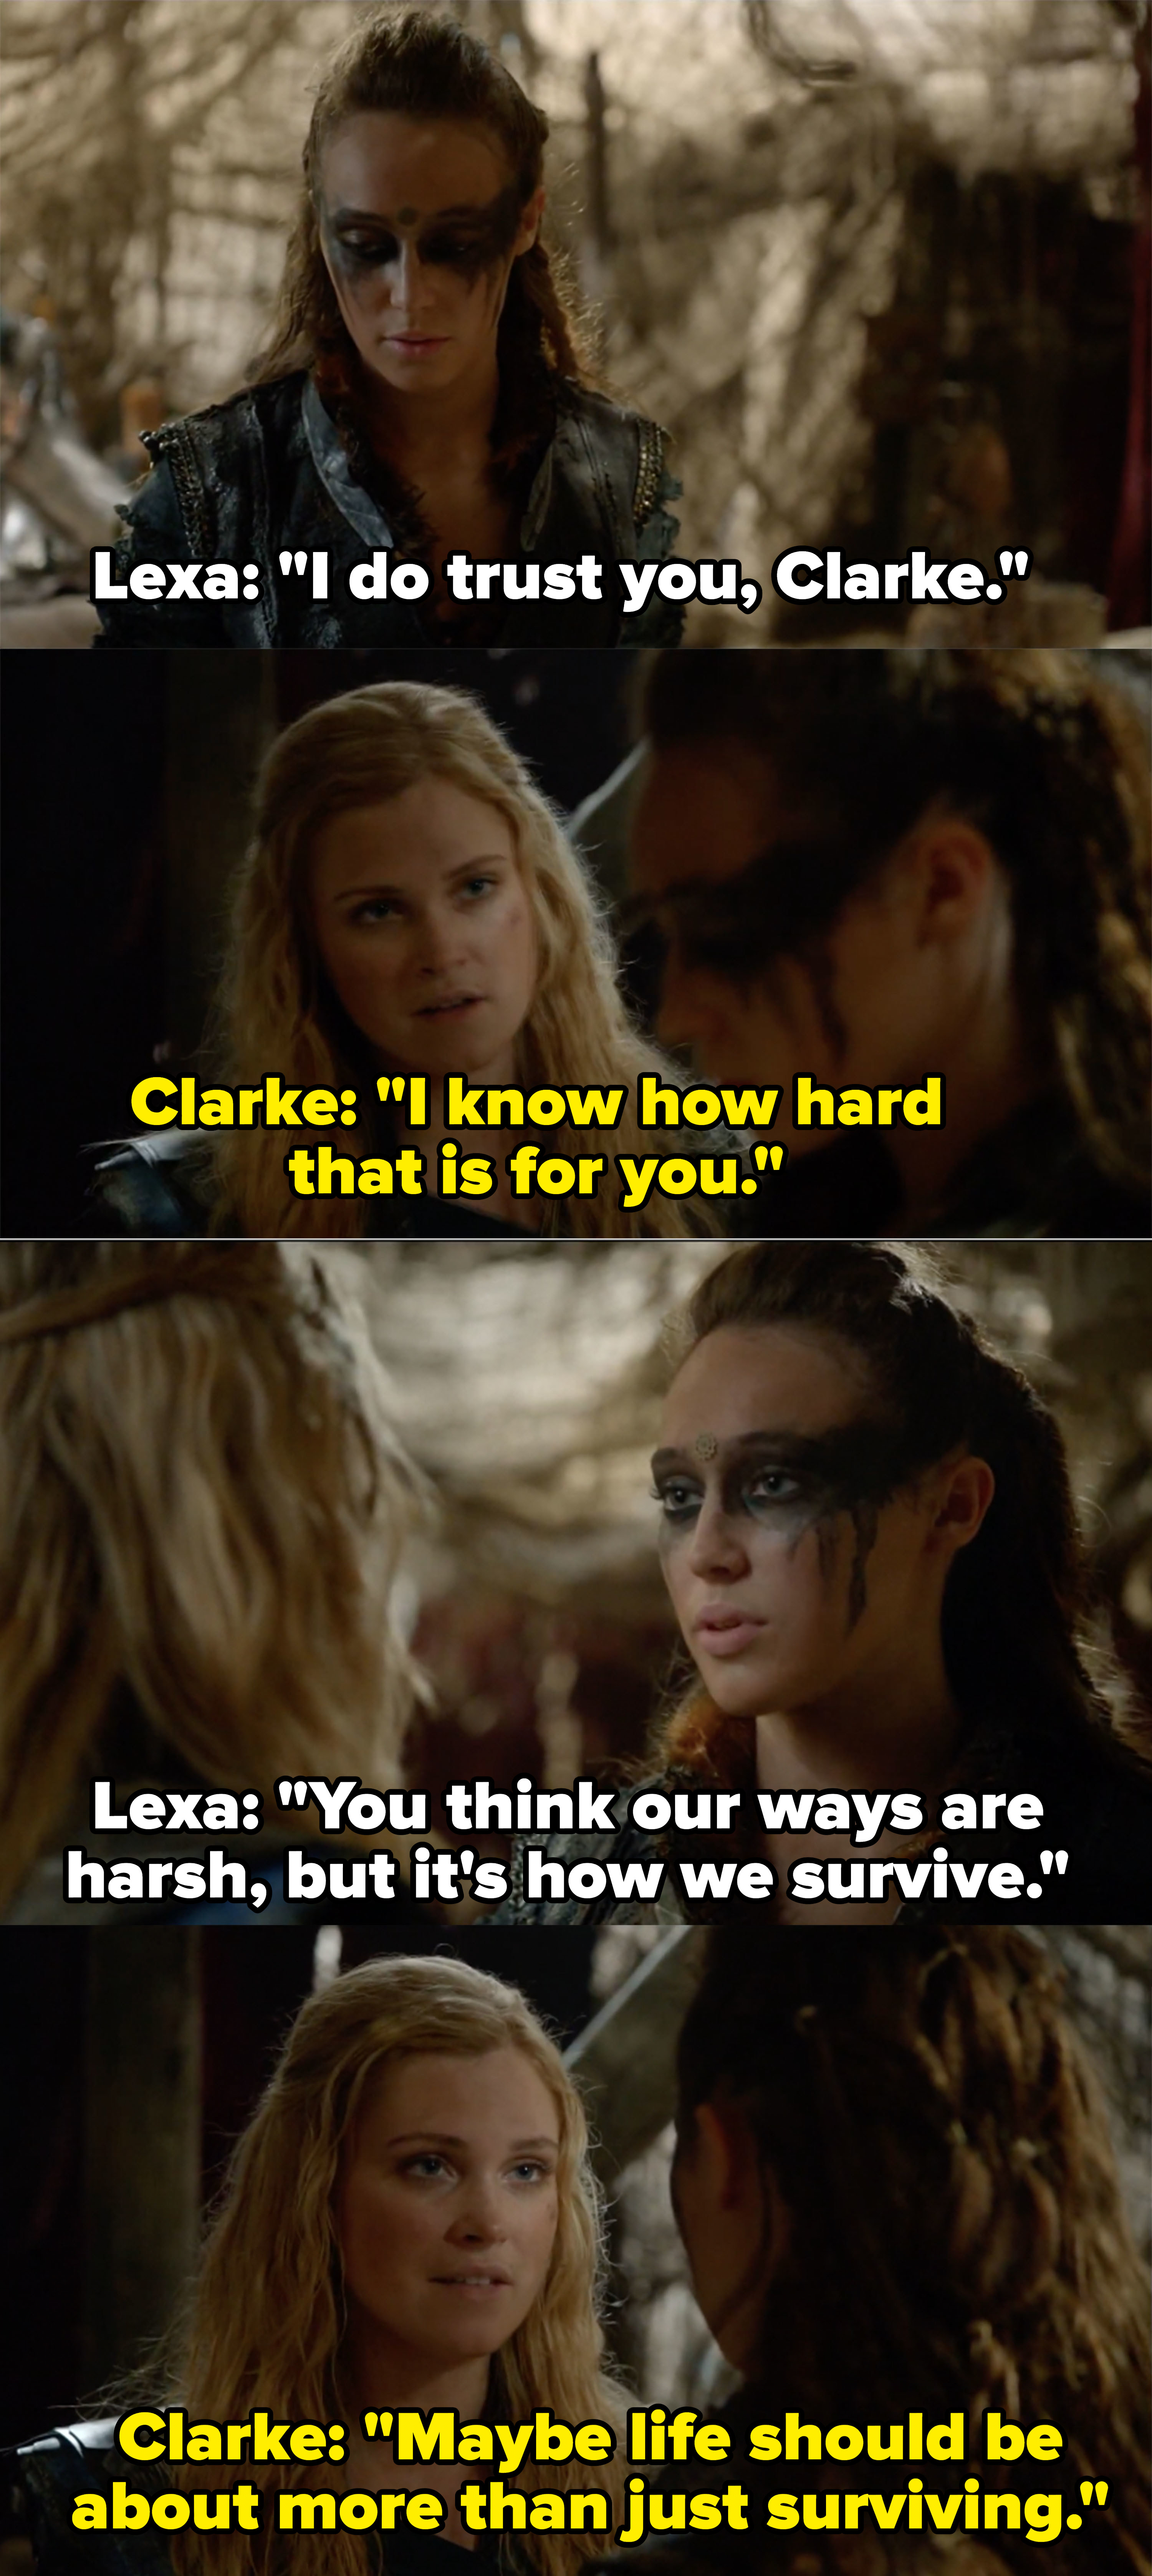 Lexa says she does trust Clarke and that she knows Clarke thinks their ways are harsh but it&#x27;s just how they survive, Clarke replies, &quot;Maybe life should be about more than just surviving&quot;